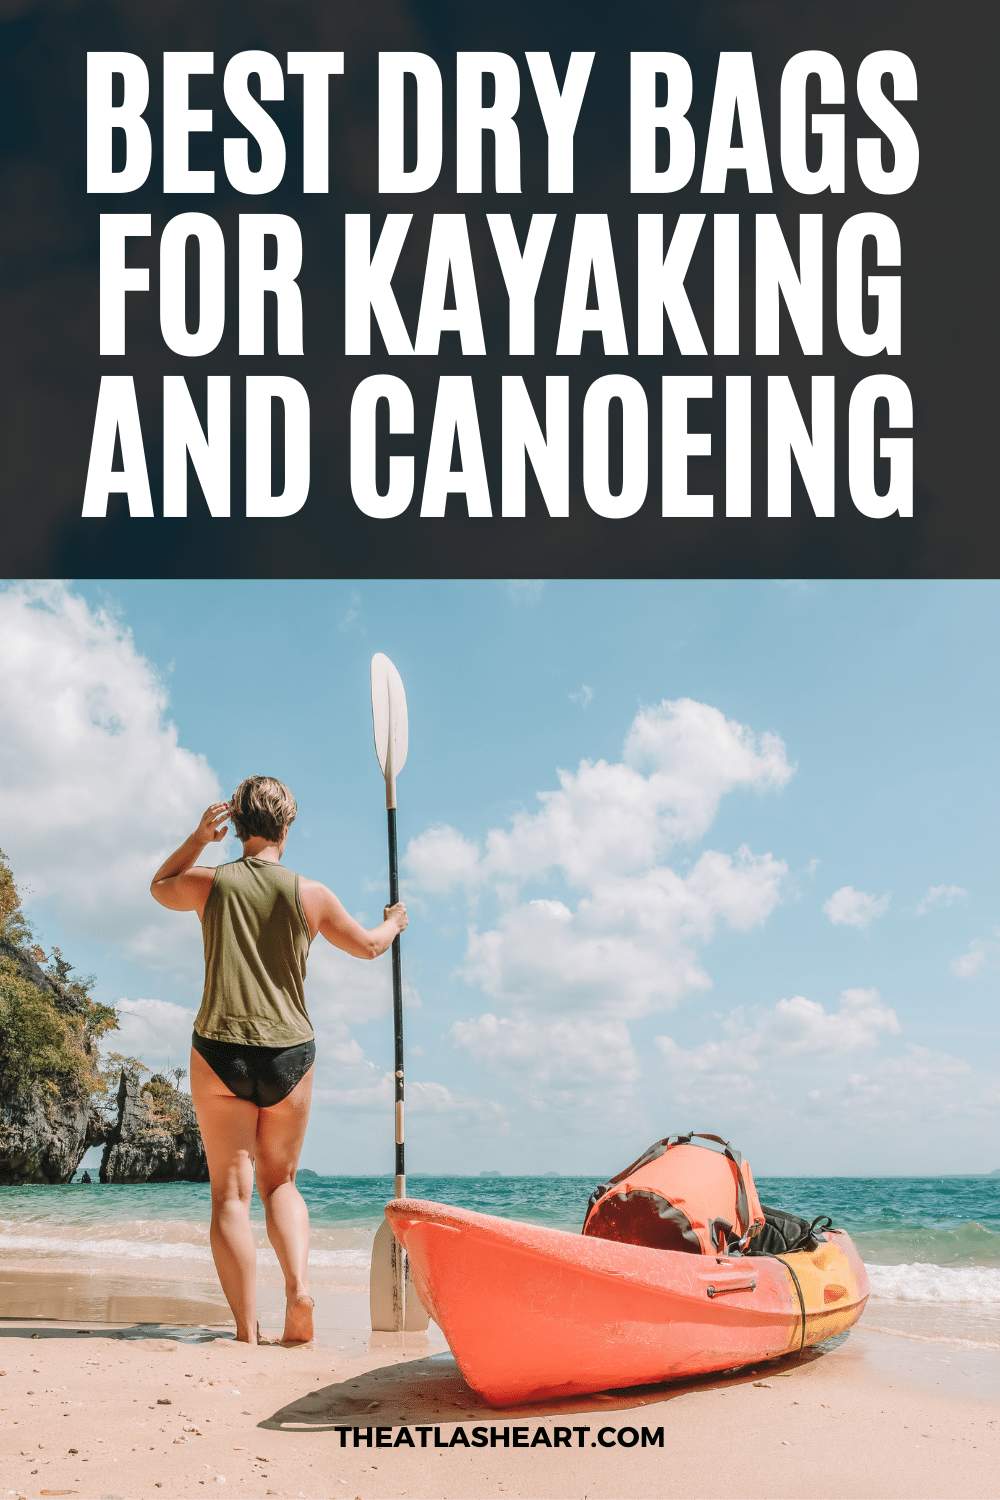 15 Best Dry Bags for Kayaking and Canoeing to Keep Things Dry 